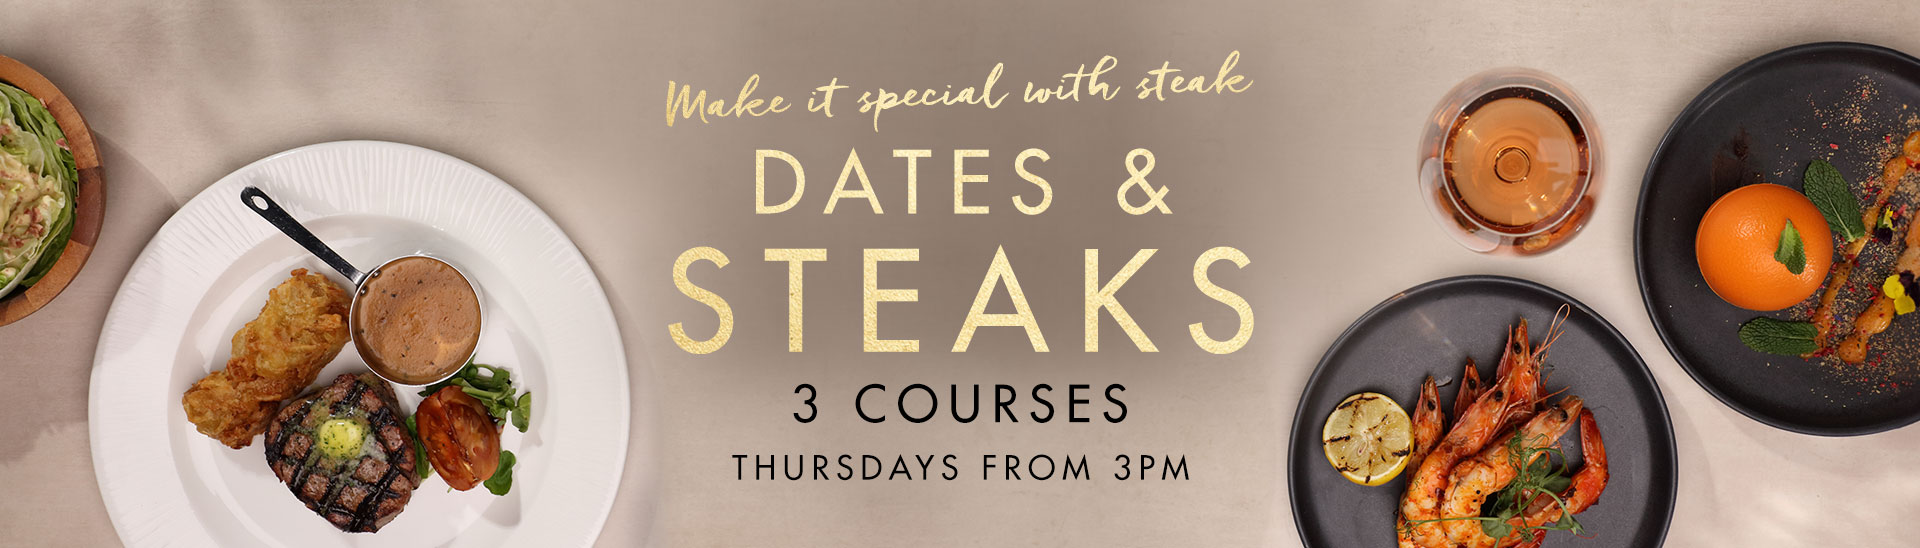 Dates & Steaks at Miller & Carter Wheathampstead